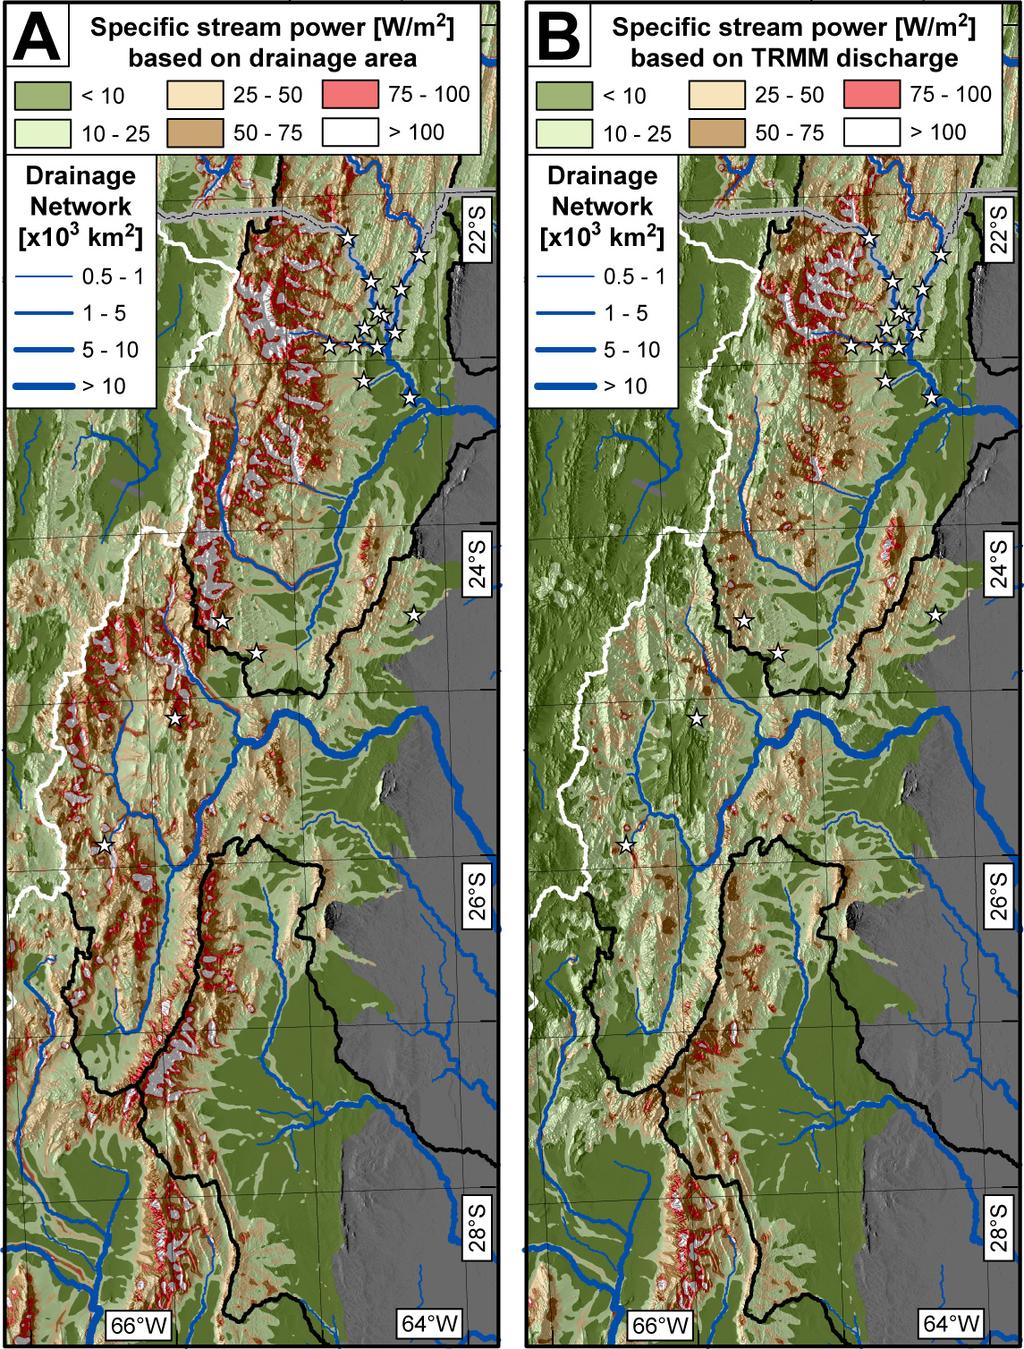 B. Bookhagen and M.R. Strecker: Spatiotemporal trends in erosion rates 4. Results Figure DR 7: Comparison between specific stream power (SSP) based on drainage area (A) and TRMM discharge (B).